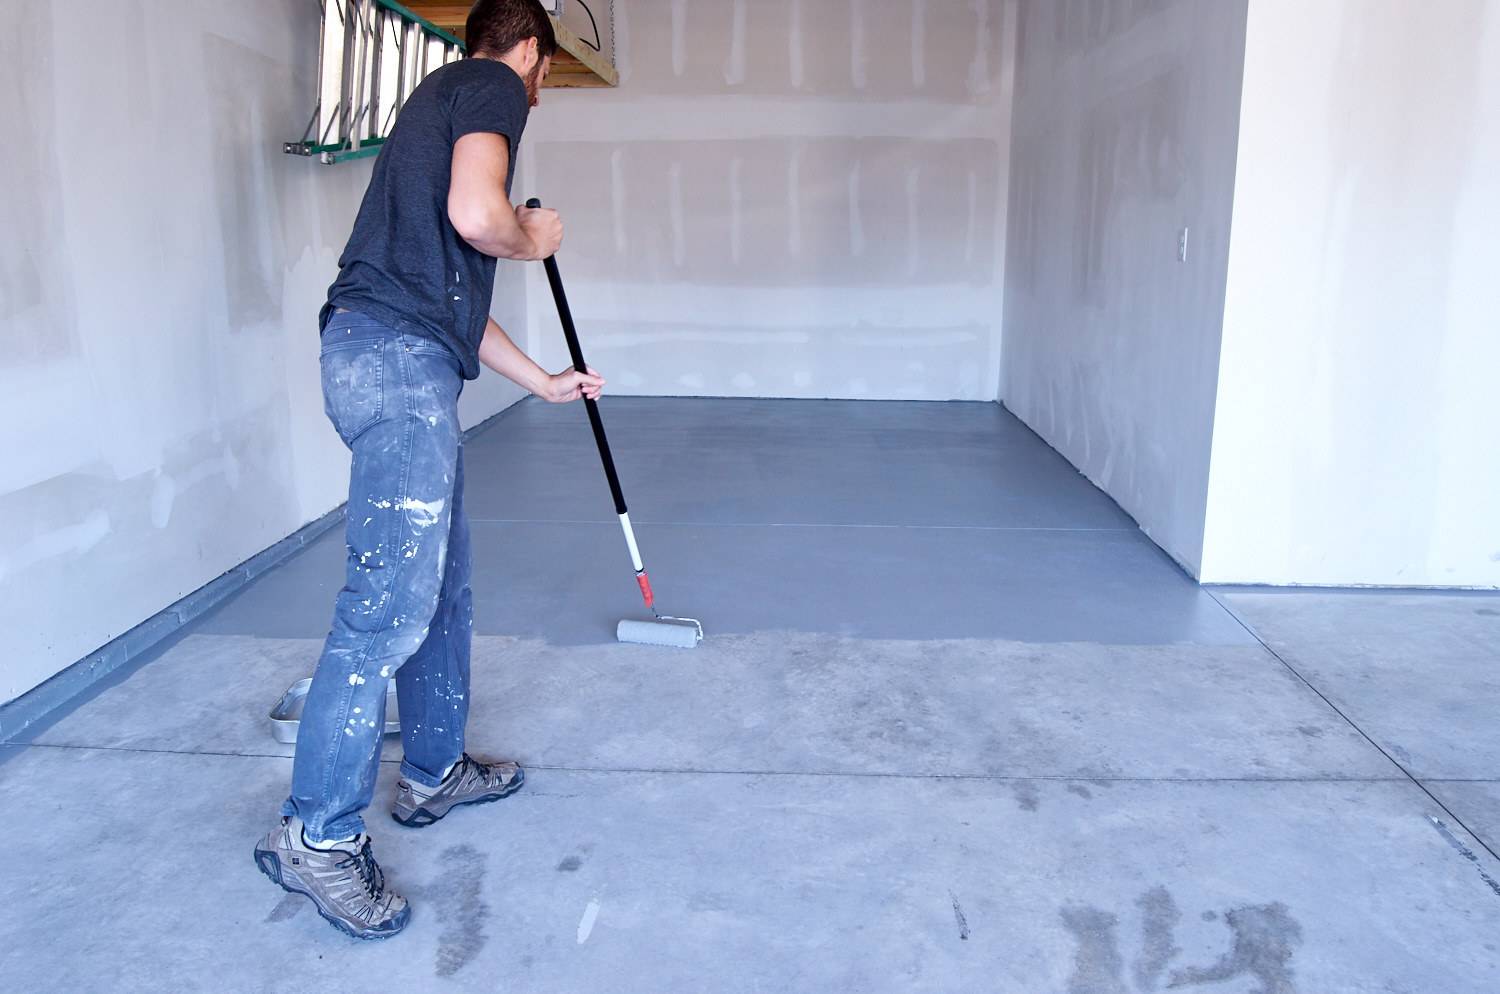 roll the paint on the concrete using a normal paint roller and pole